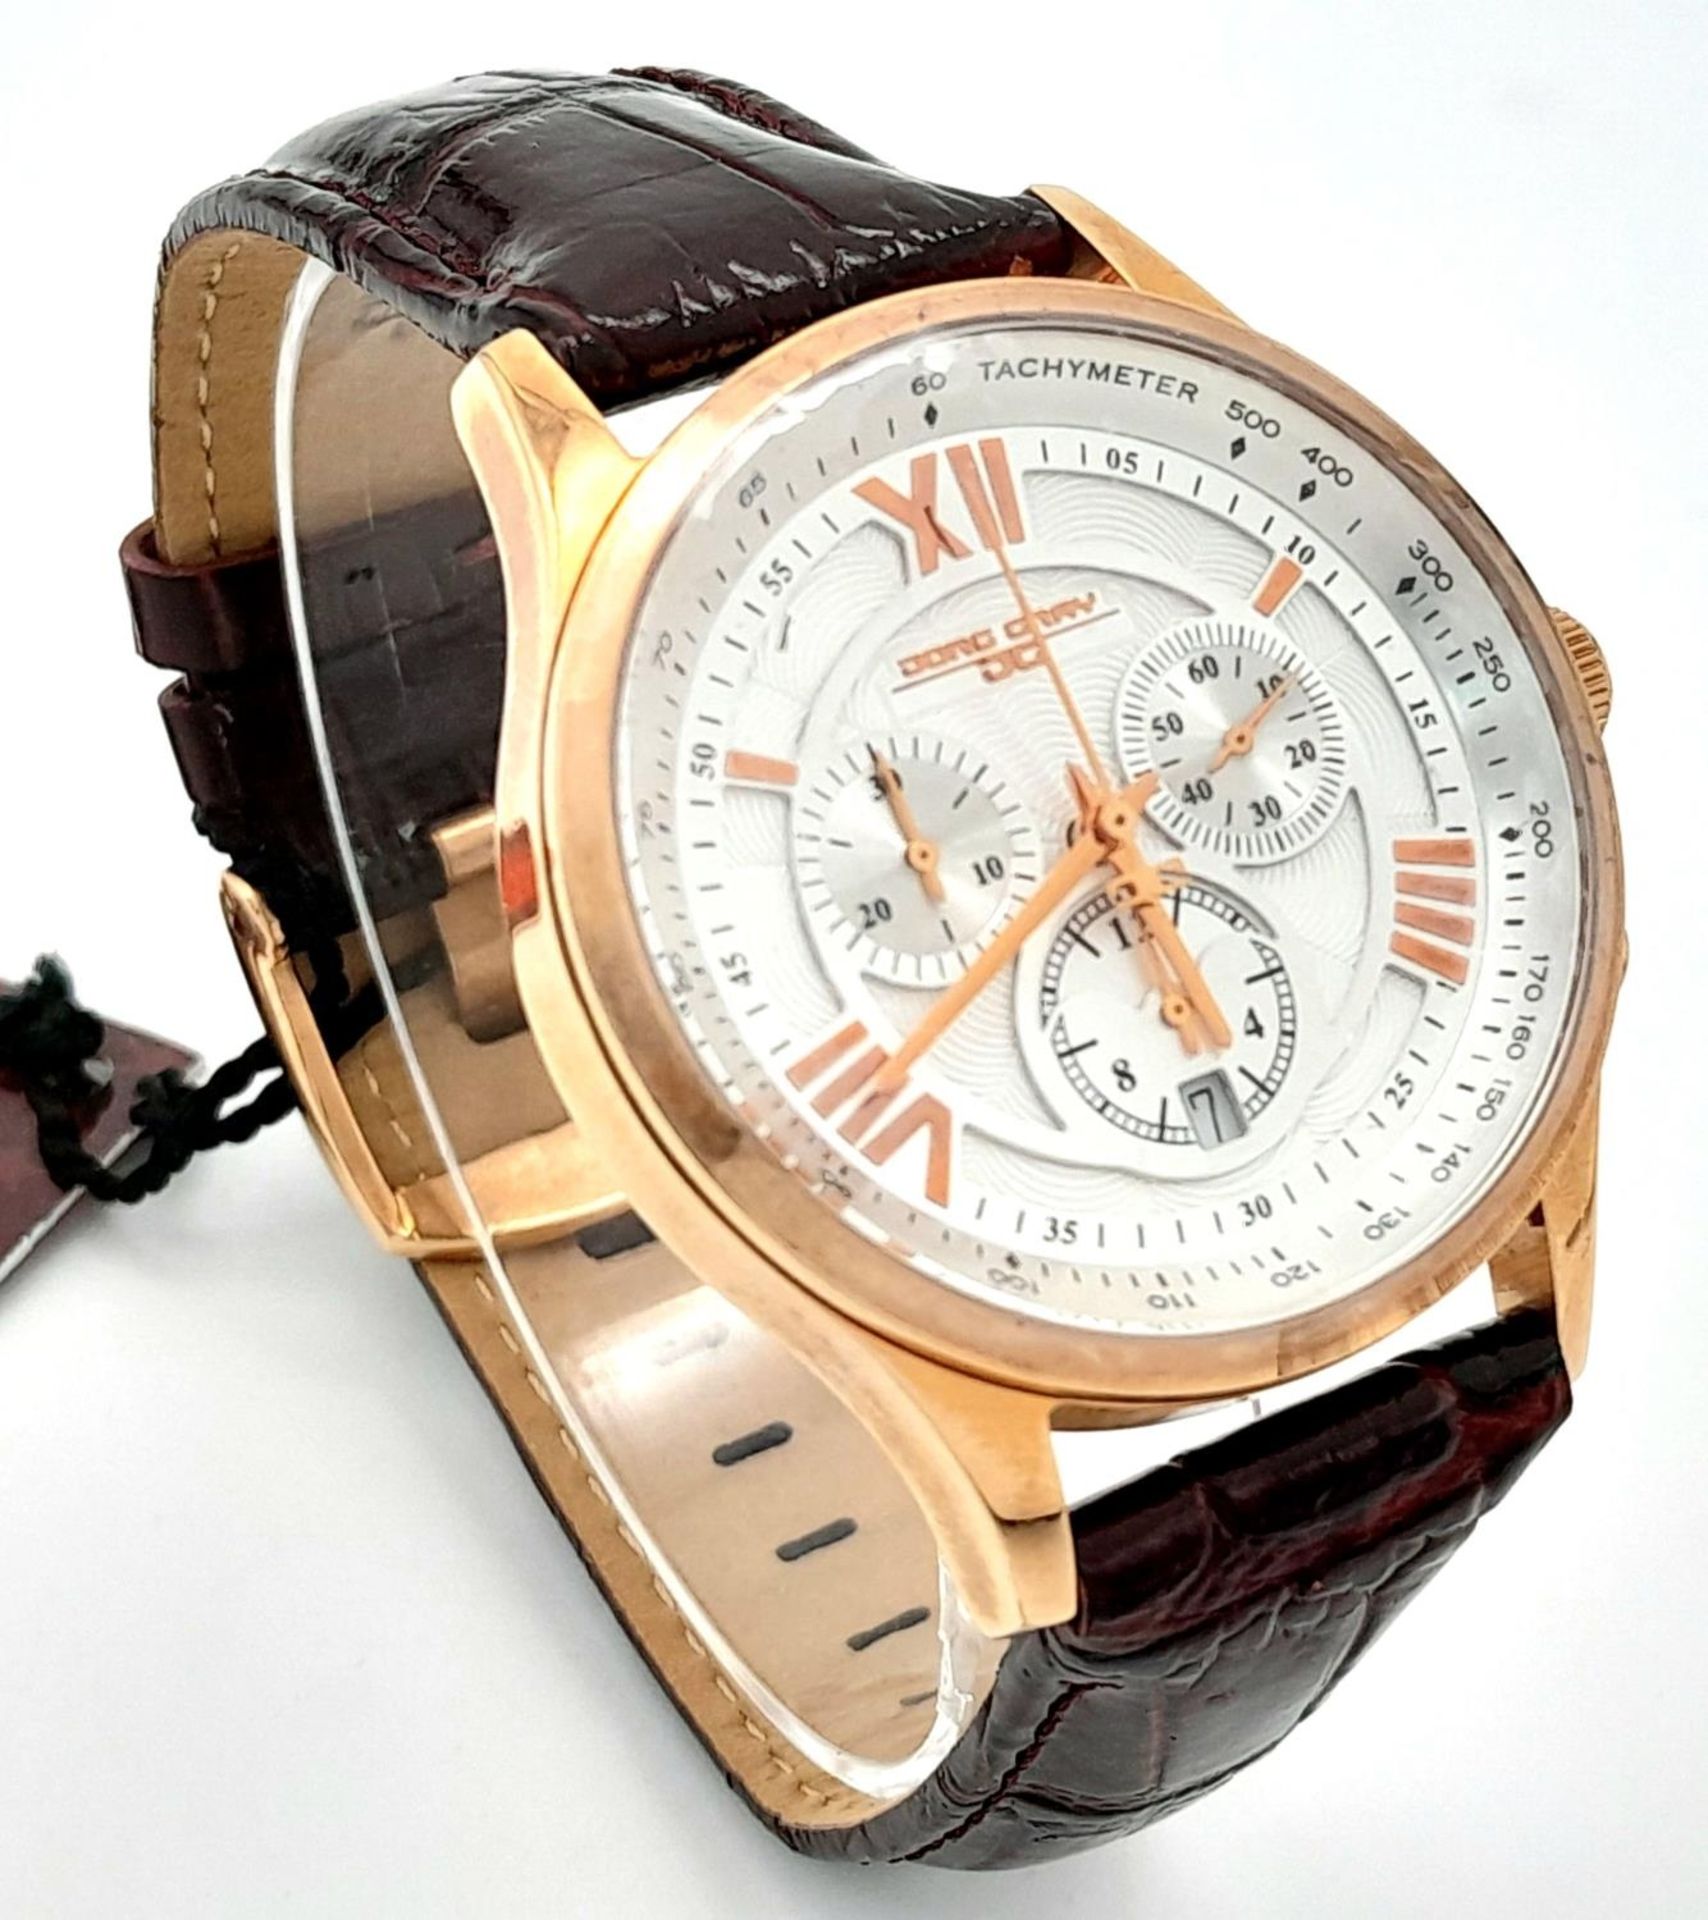 A Jorg Gray Quartz Chronograph Gents Watch. Burgundy leather strap. Gilded case - 42mm. White dial - Image 3 of 7